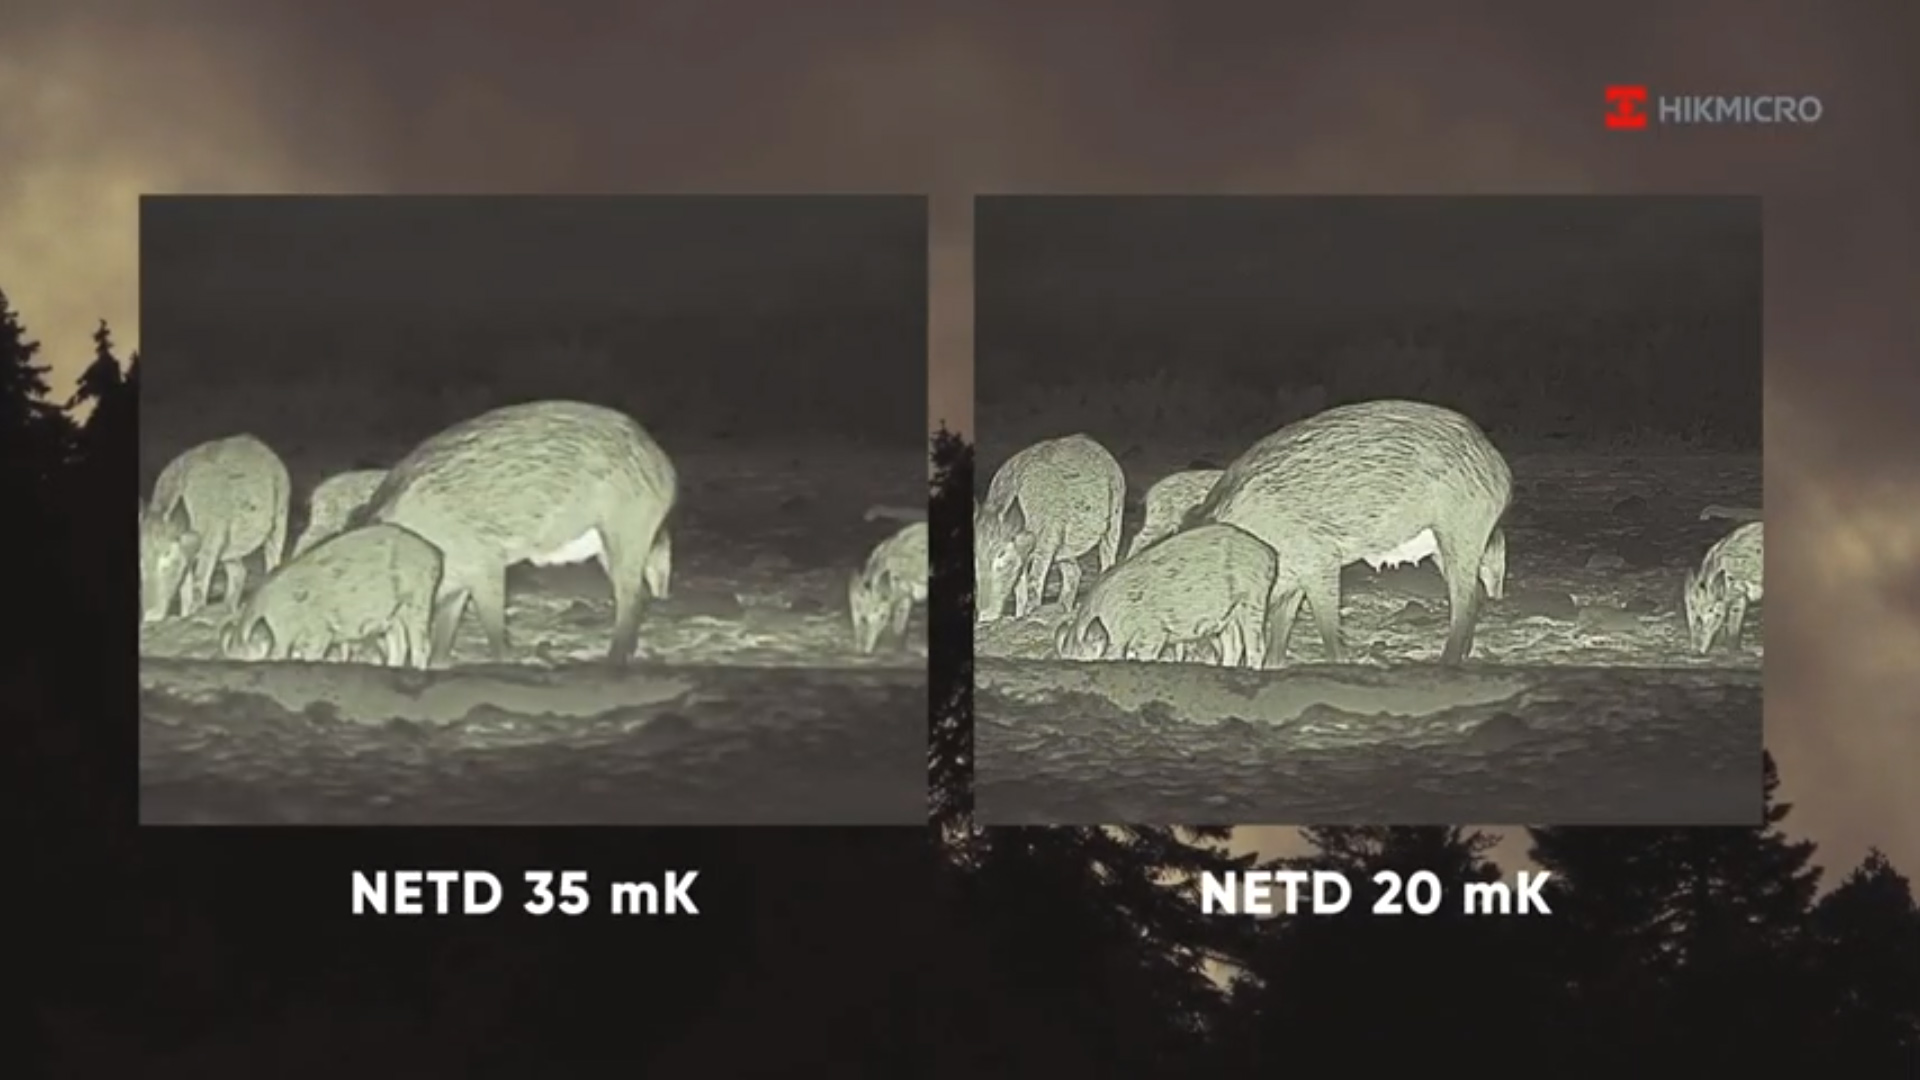 An image demostrating the differene between NETD 20 mK and NETD 35 mK.